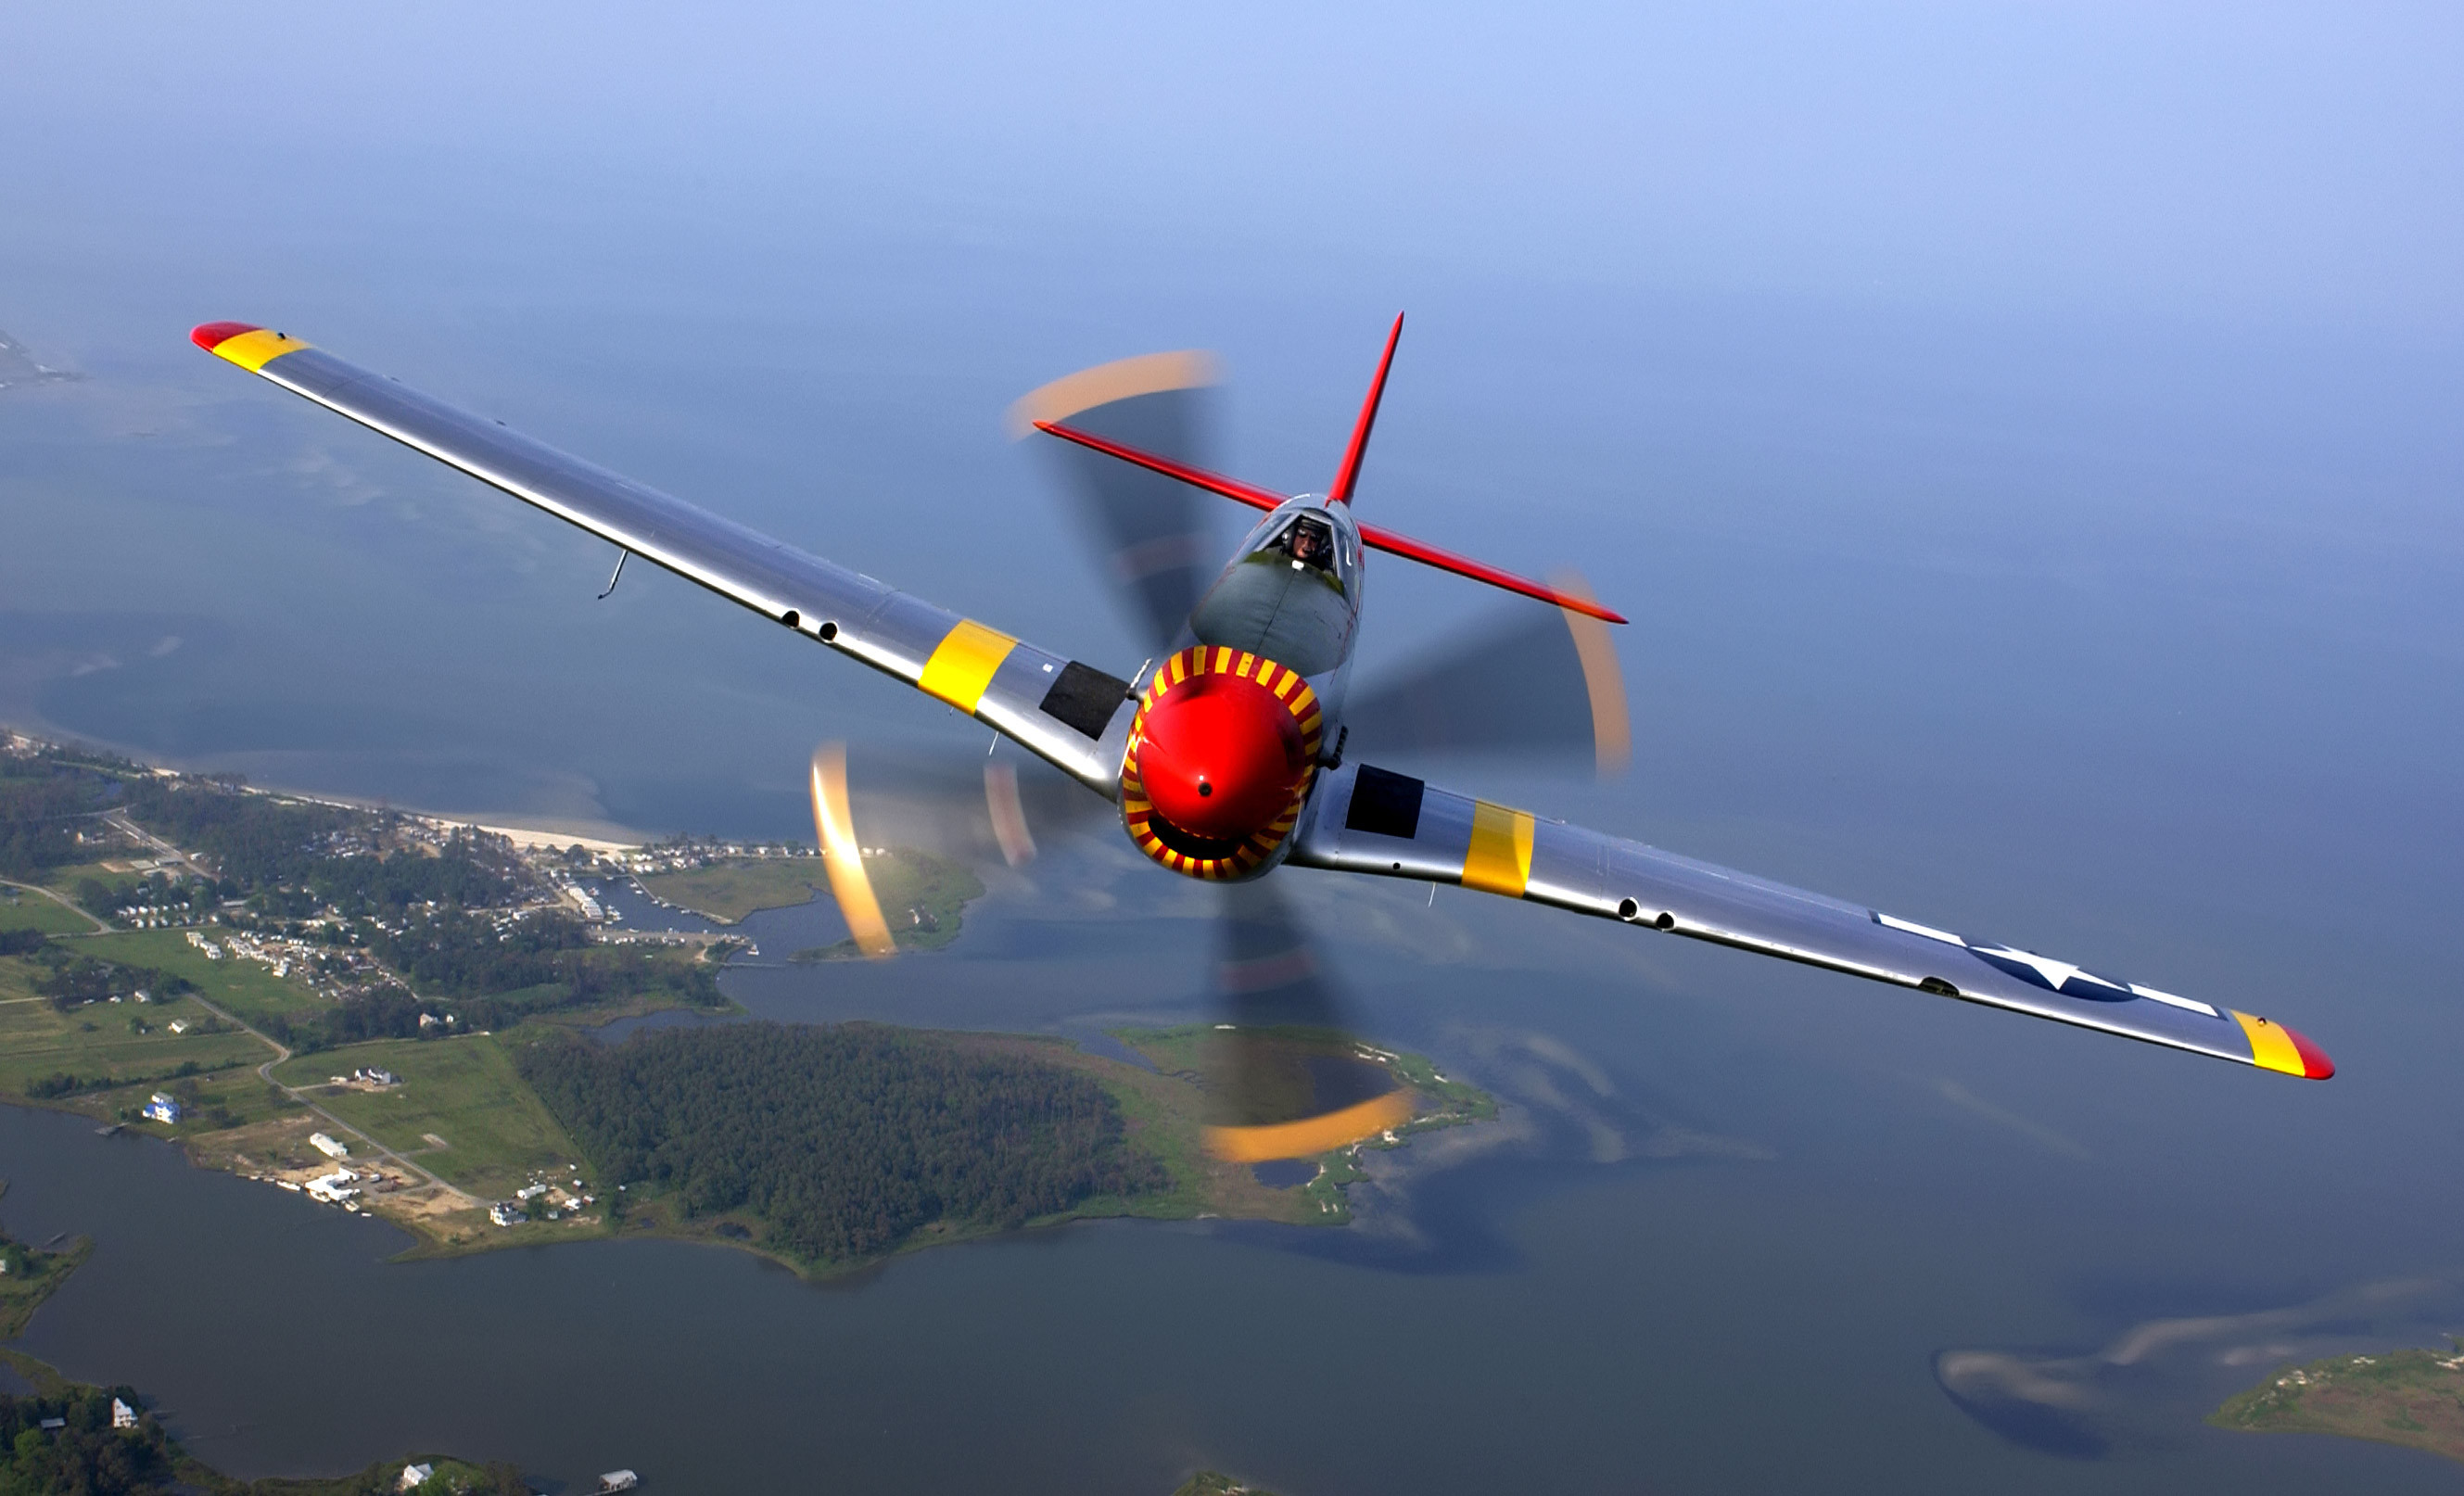 P-51D new menu wallpaper and music intro - updated directory 03172022